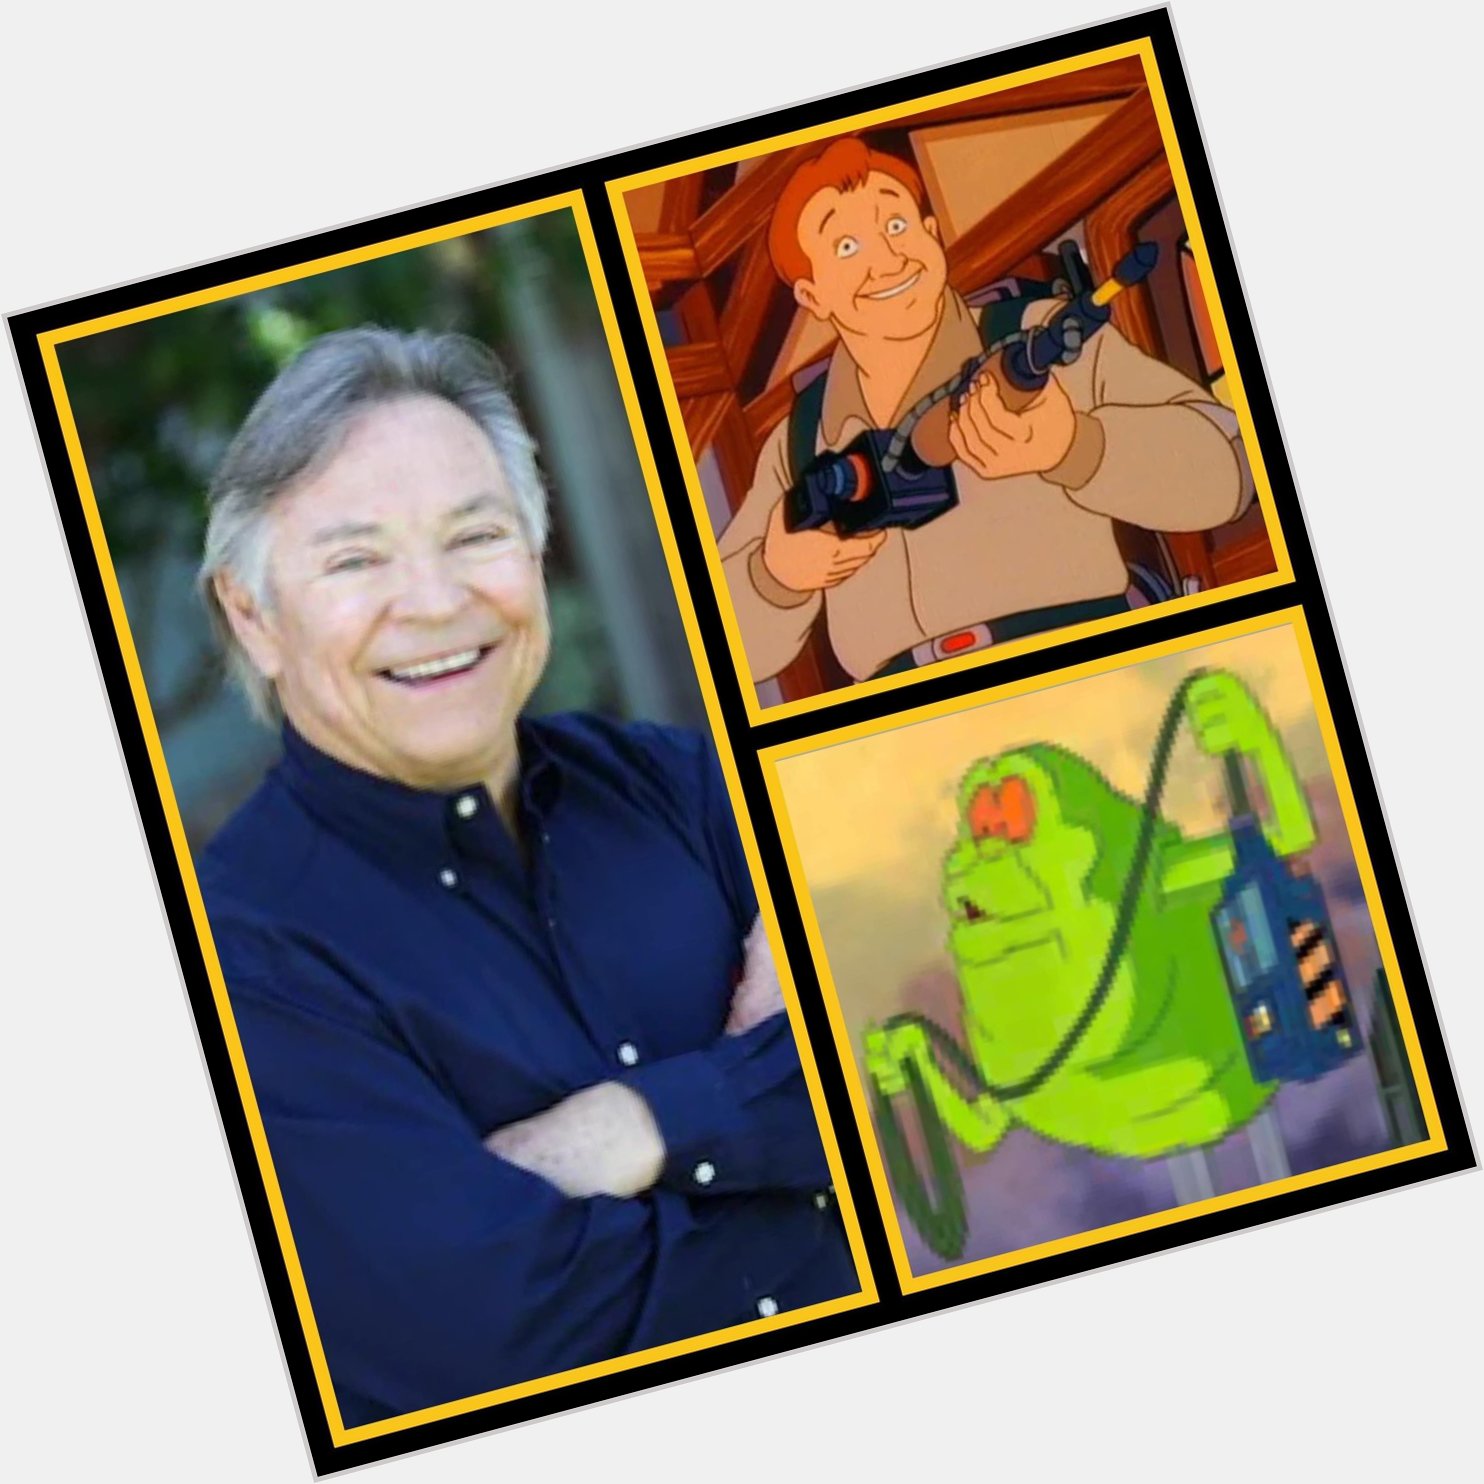 Happy Birthday to Frank Welker who voiced Dr. Ray Stantz & Slimer on The Real Ghostbusters 